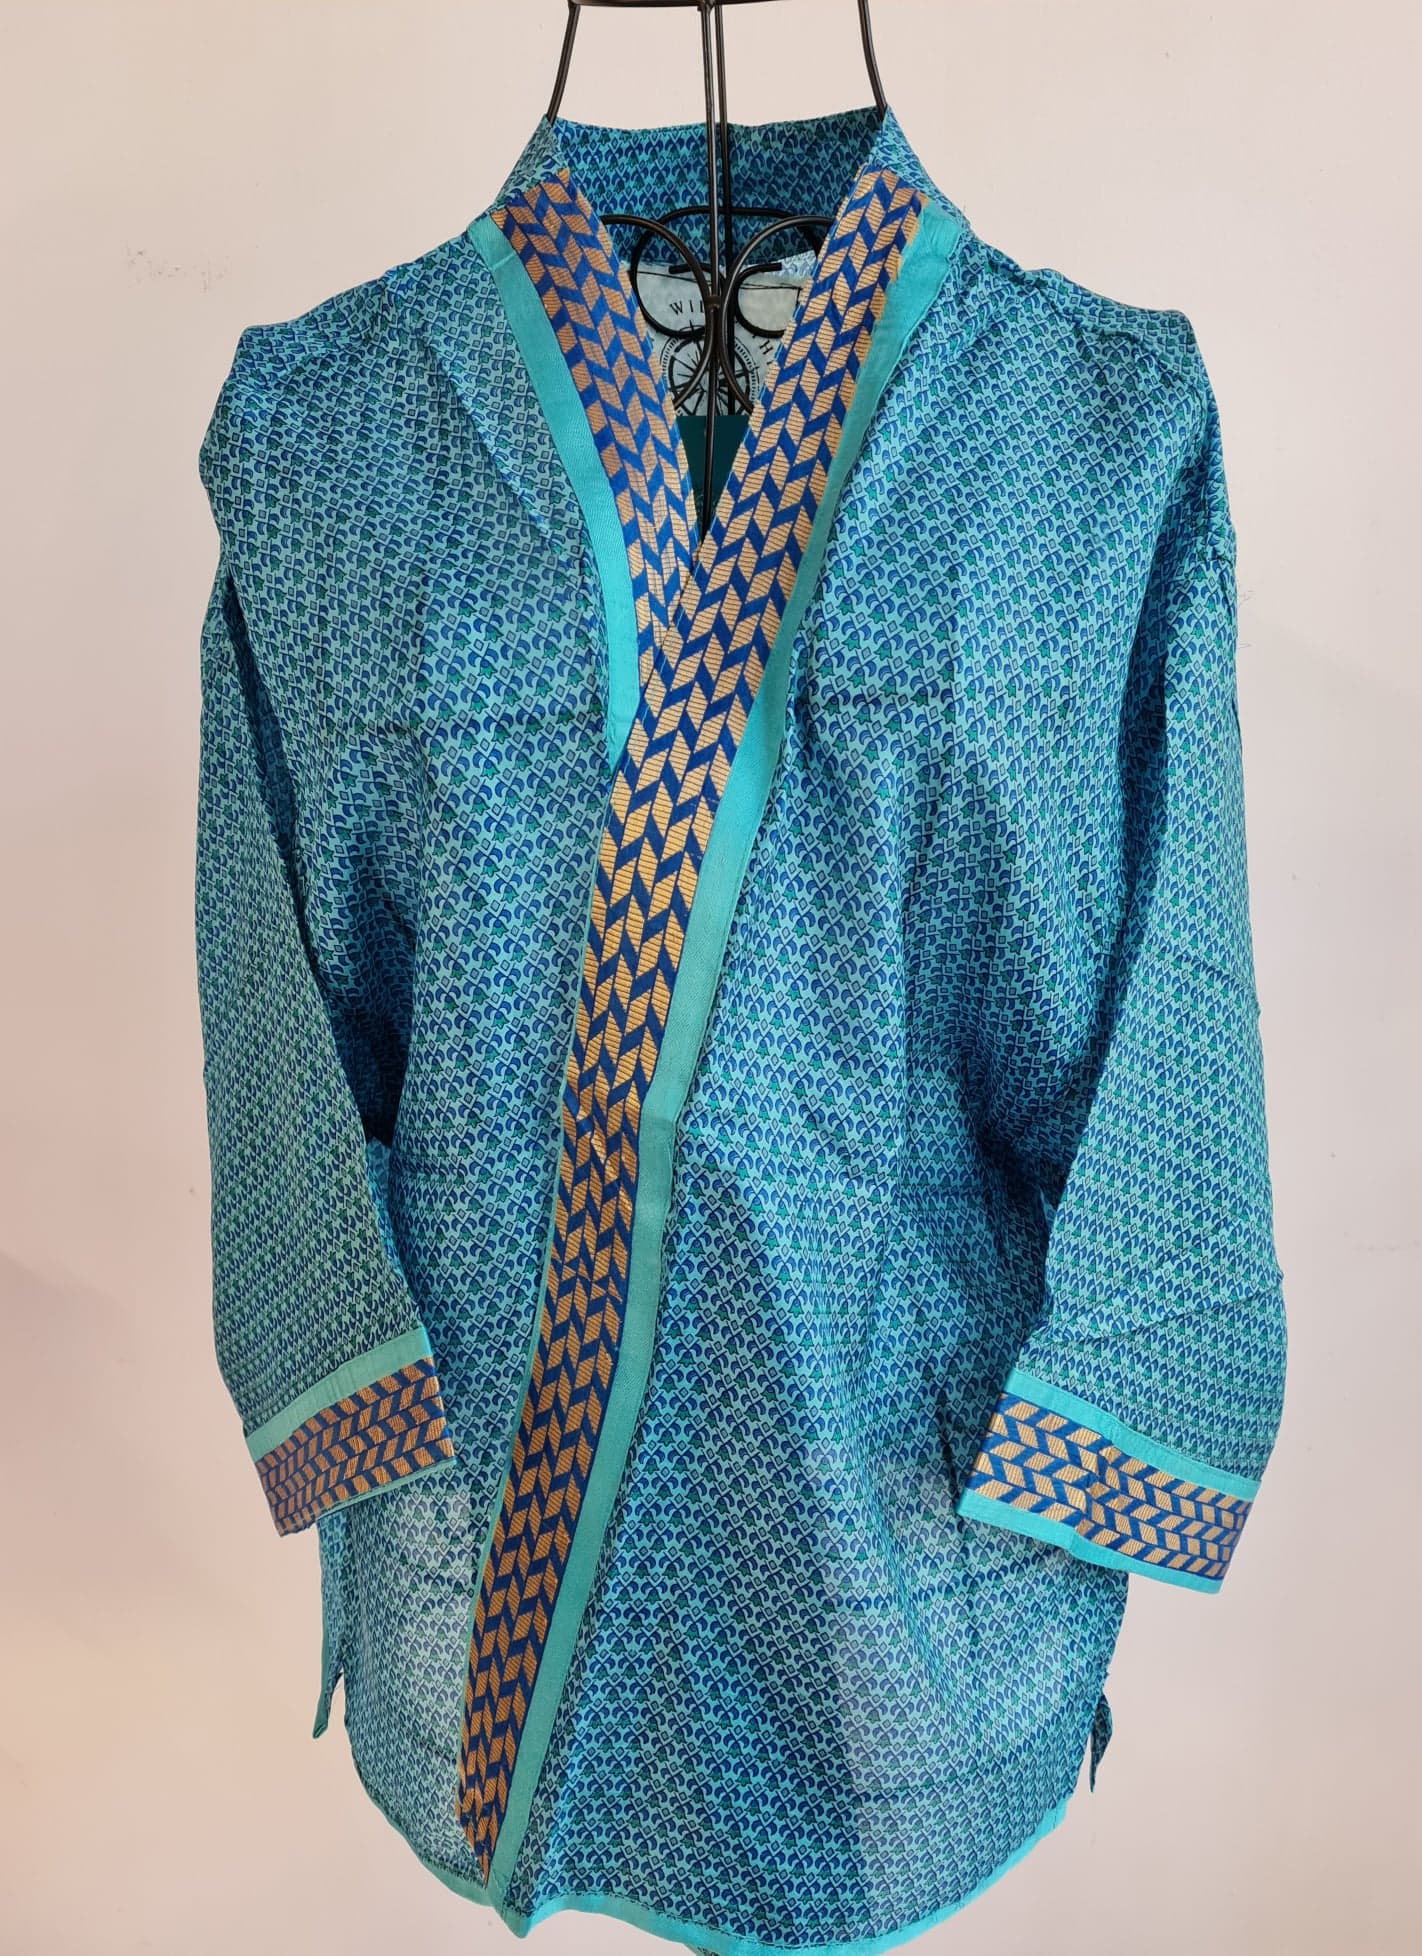 a busy floral turquoise muse jacket is crossed over a wire mannequin. It features a variety of shades of blue and a golden blue trim around the front